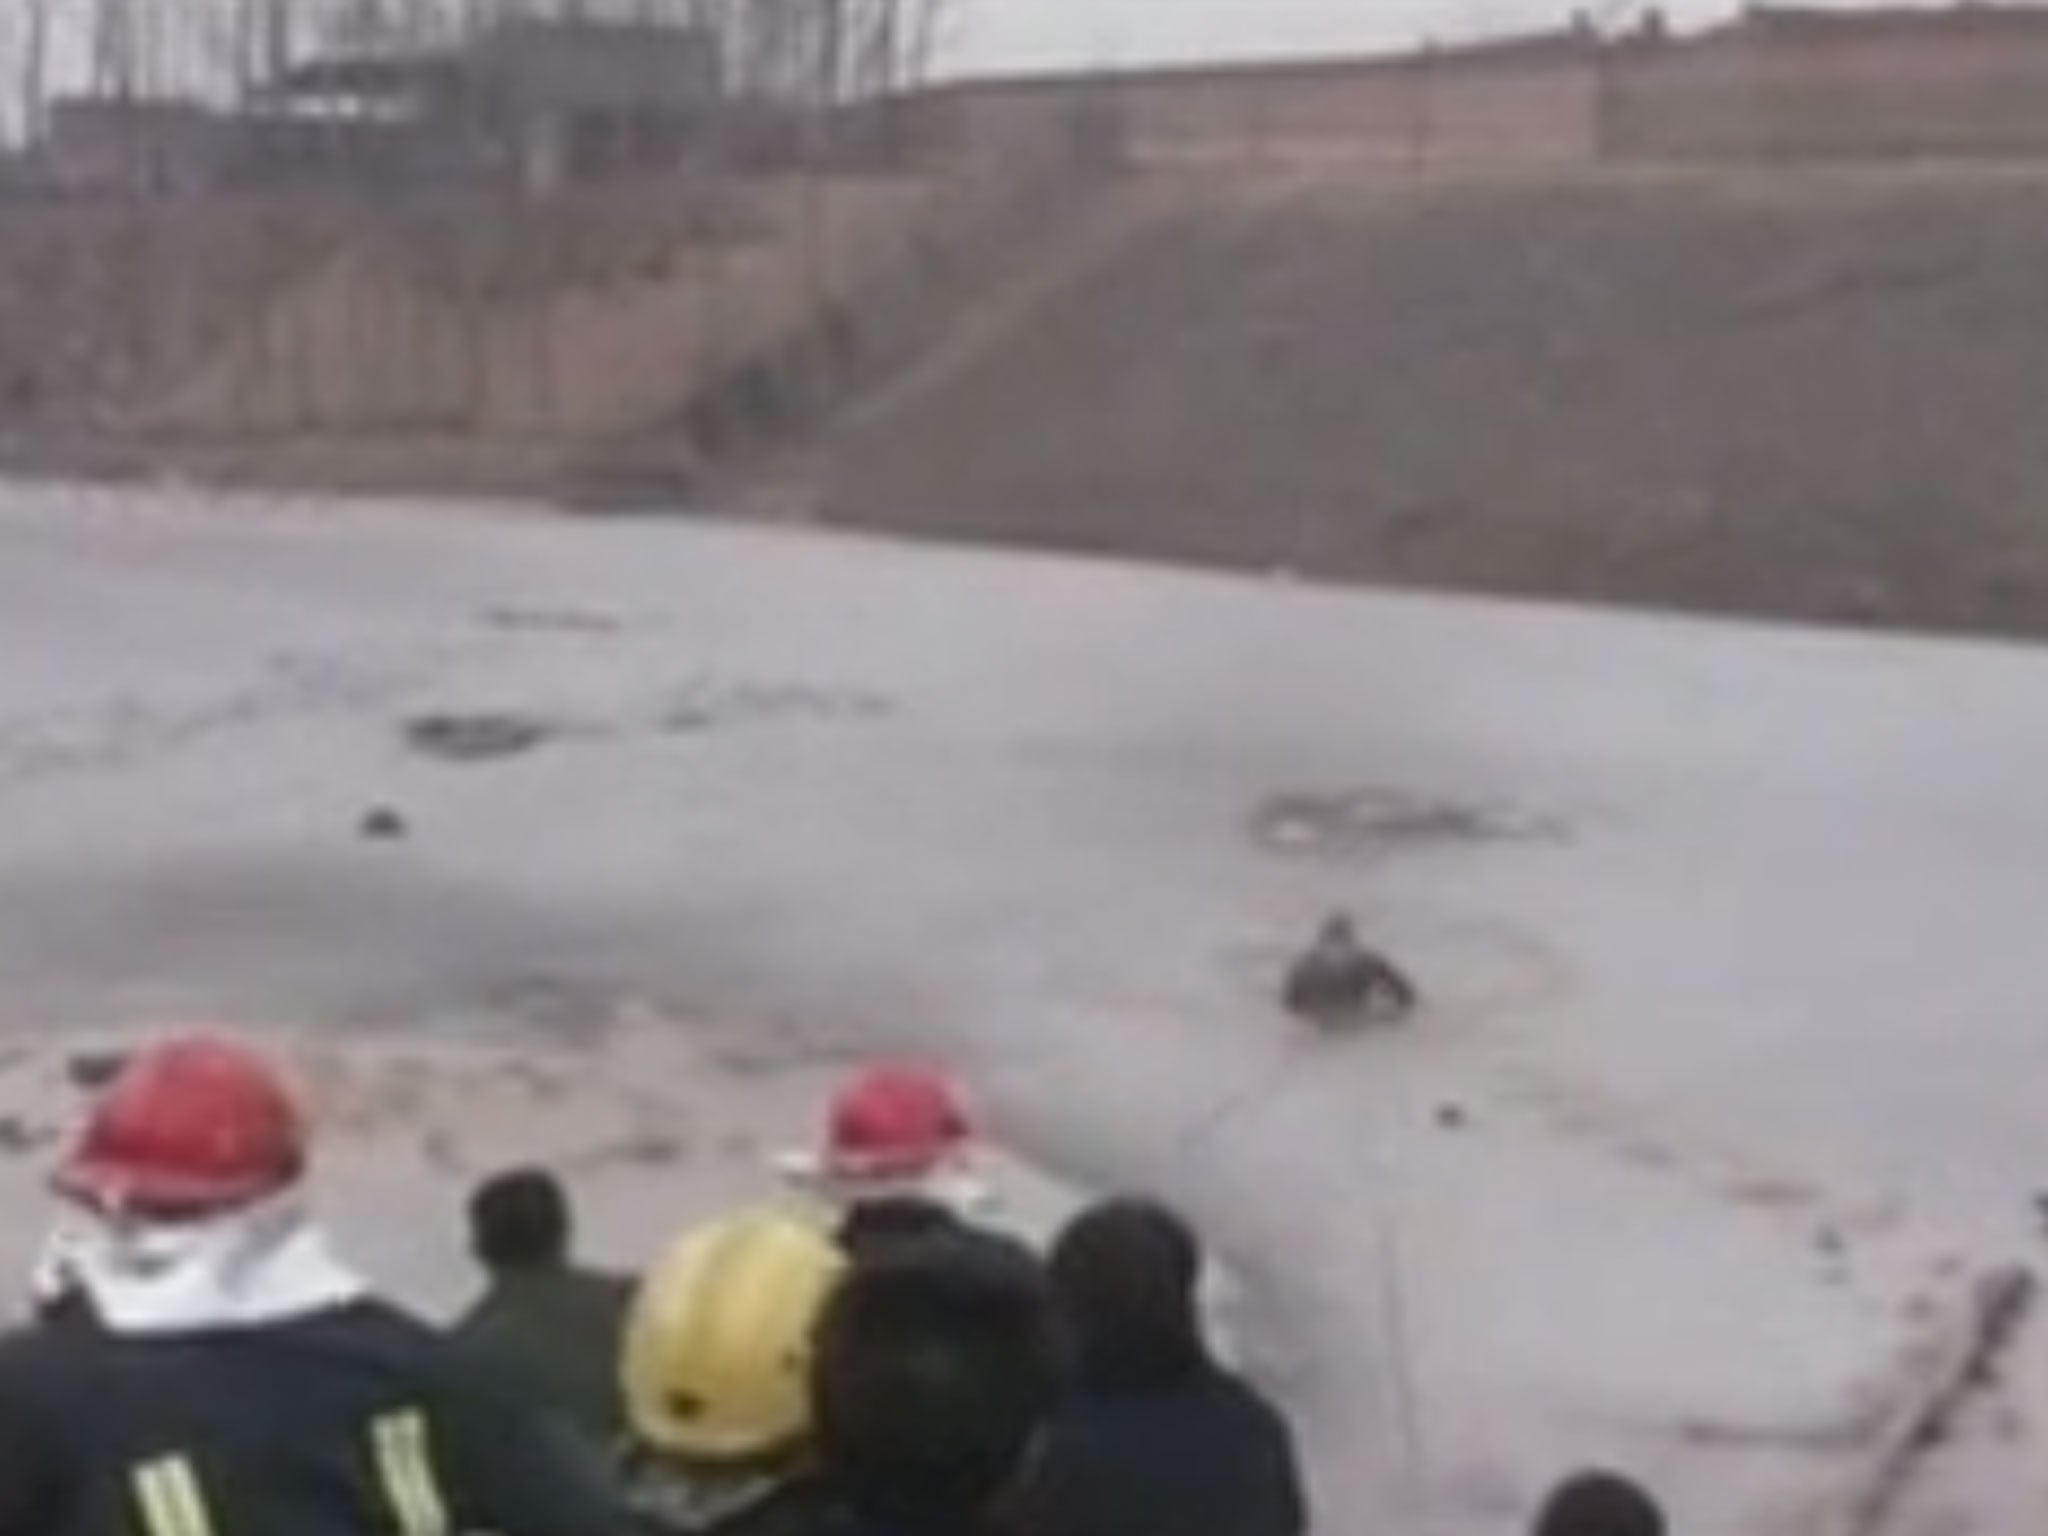 Footage emerged showing the rescue operation on the Huiji River